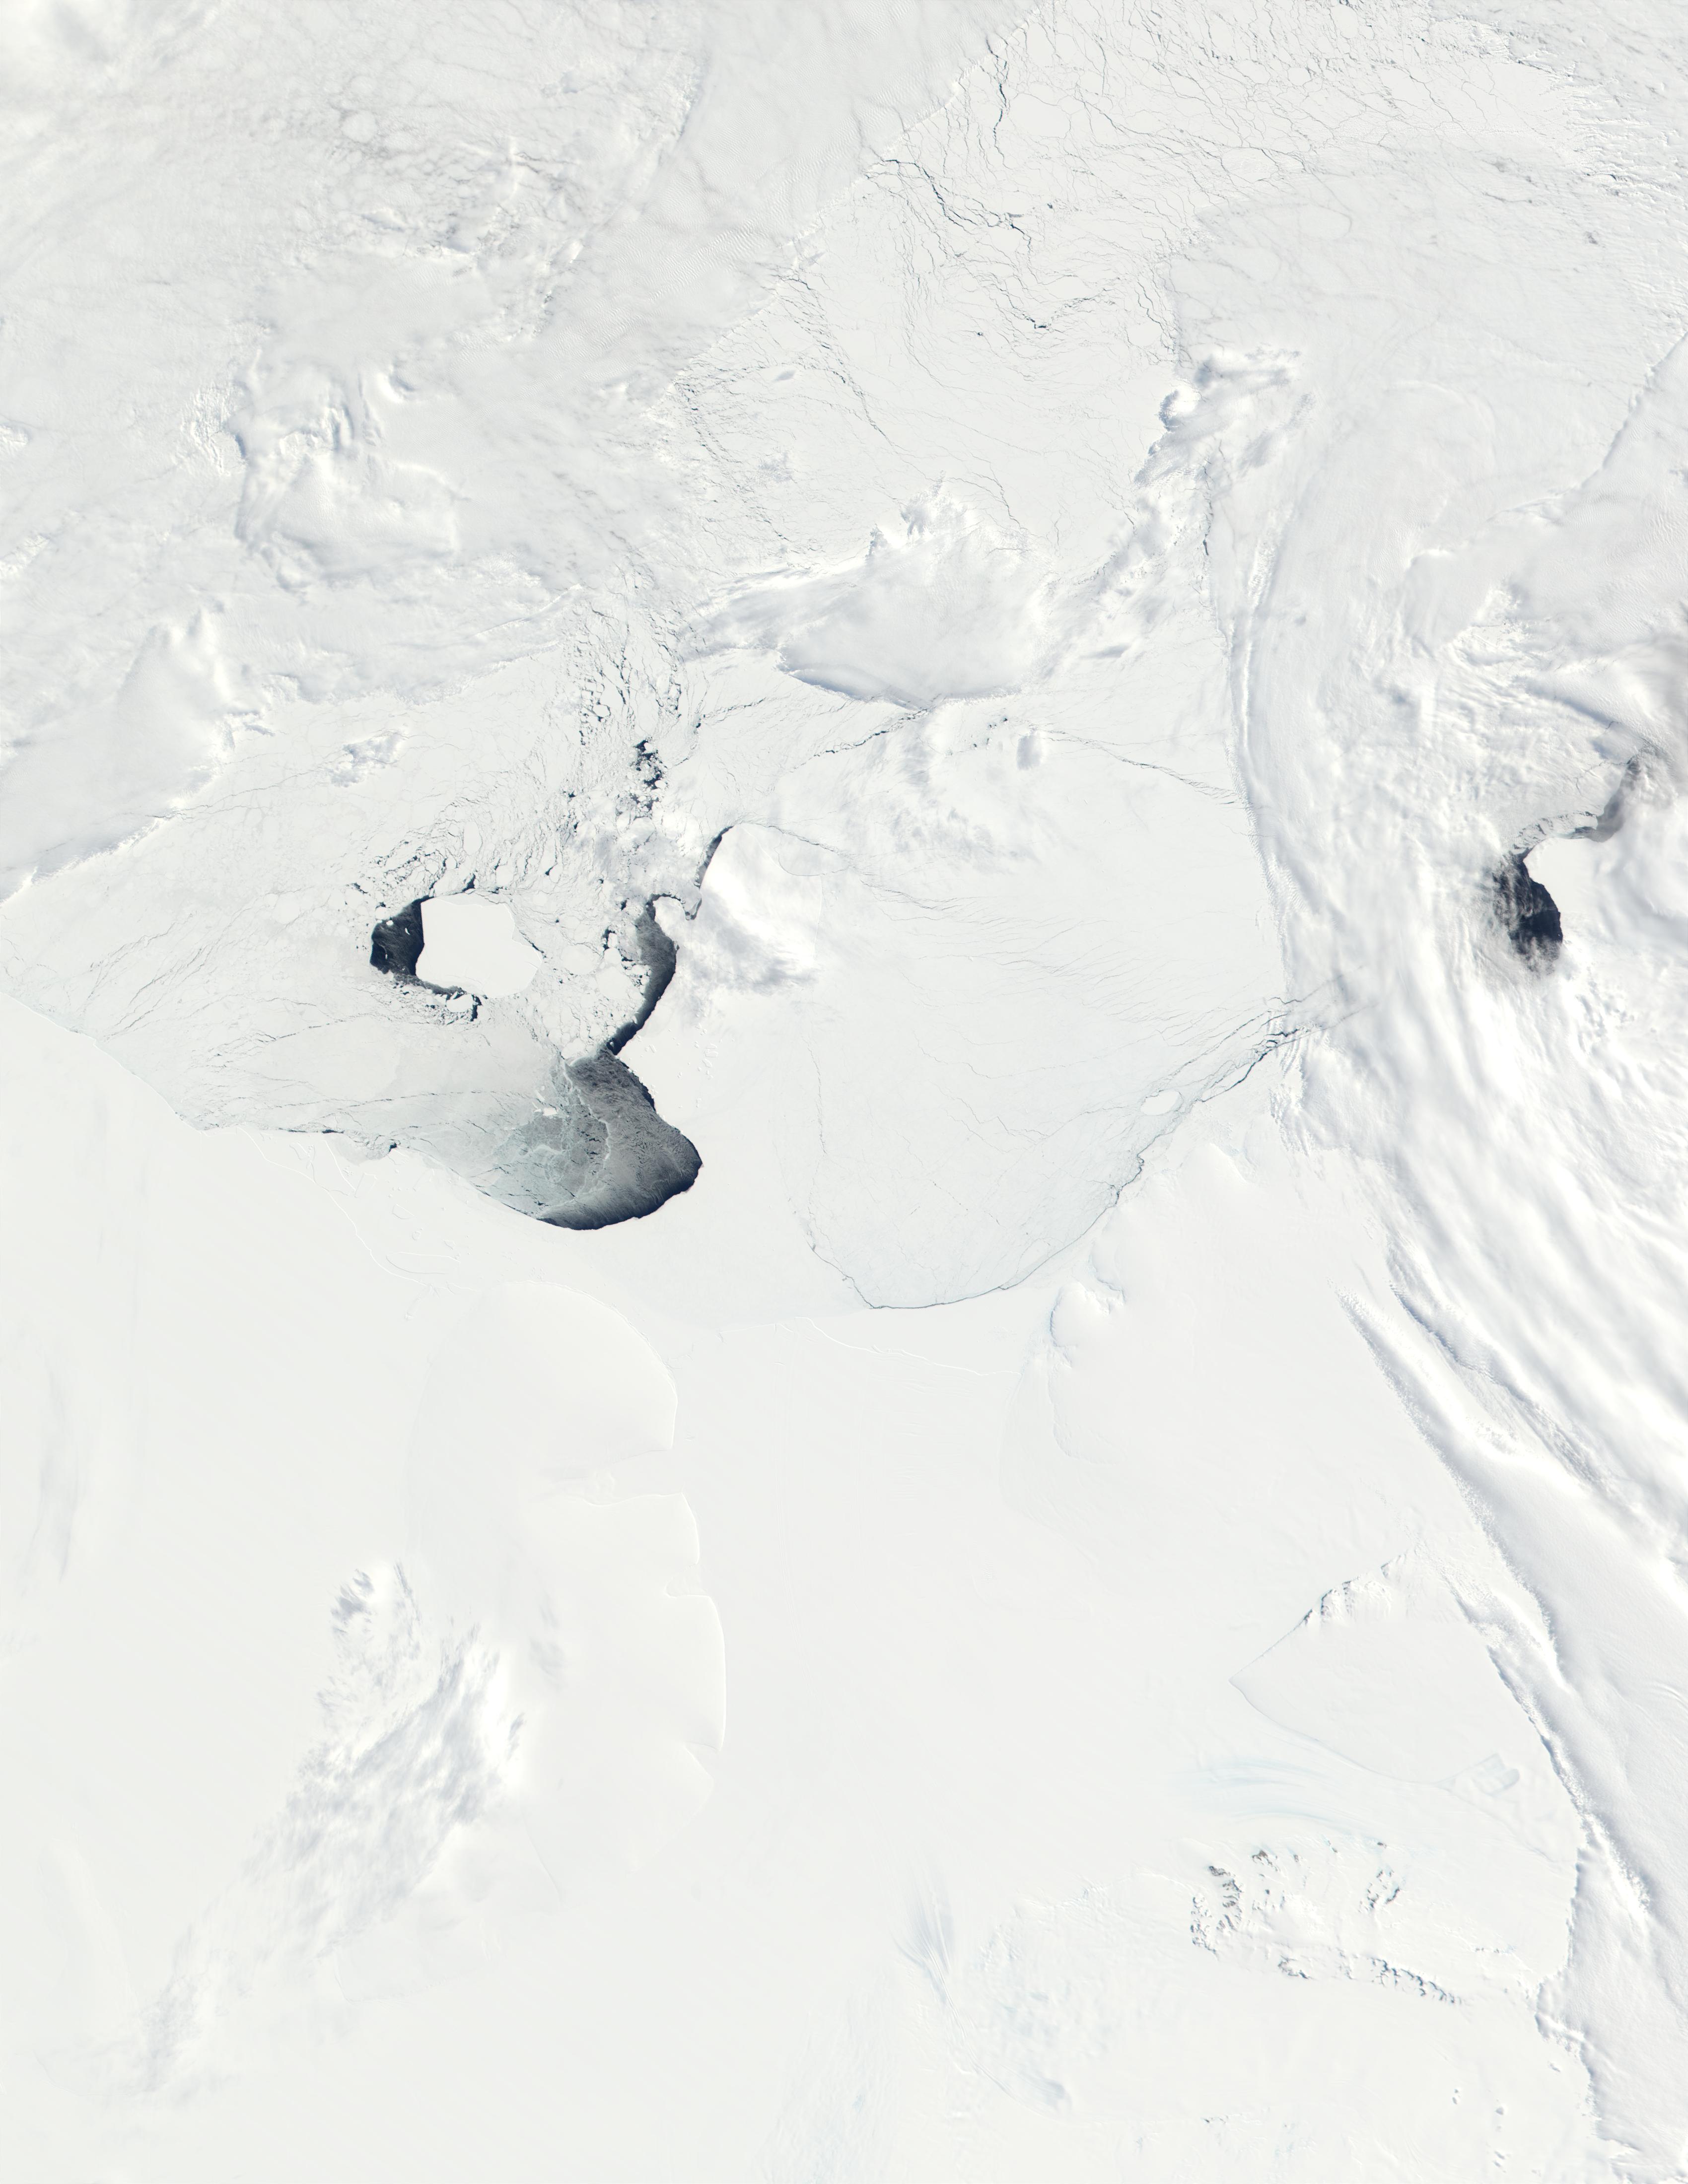 Coats Land, Ronne Ice Shelf, Filchner Ice Shelf, and Weddell Sea, Antarctica - related image preview